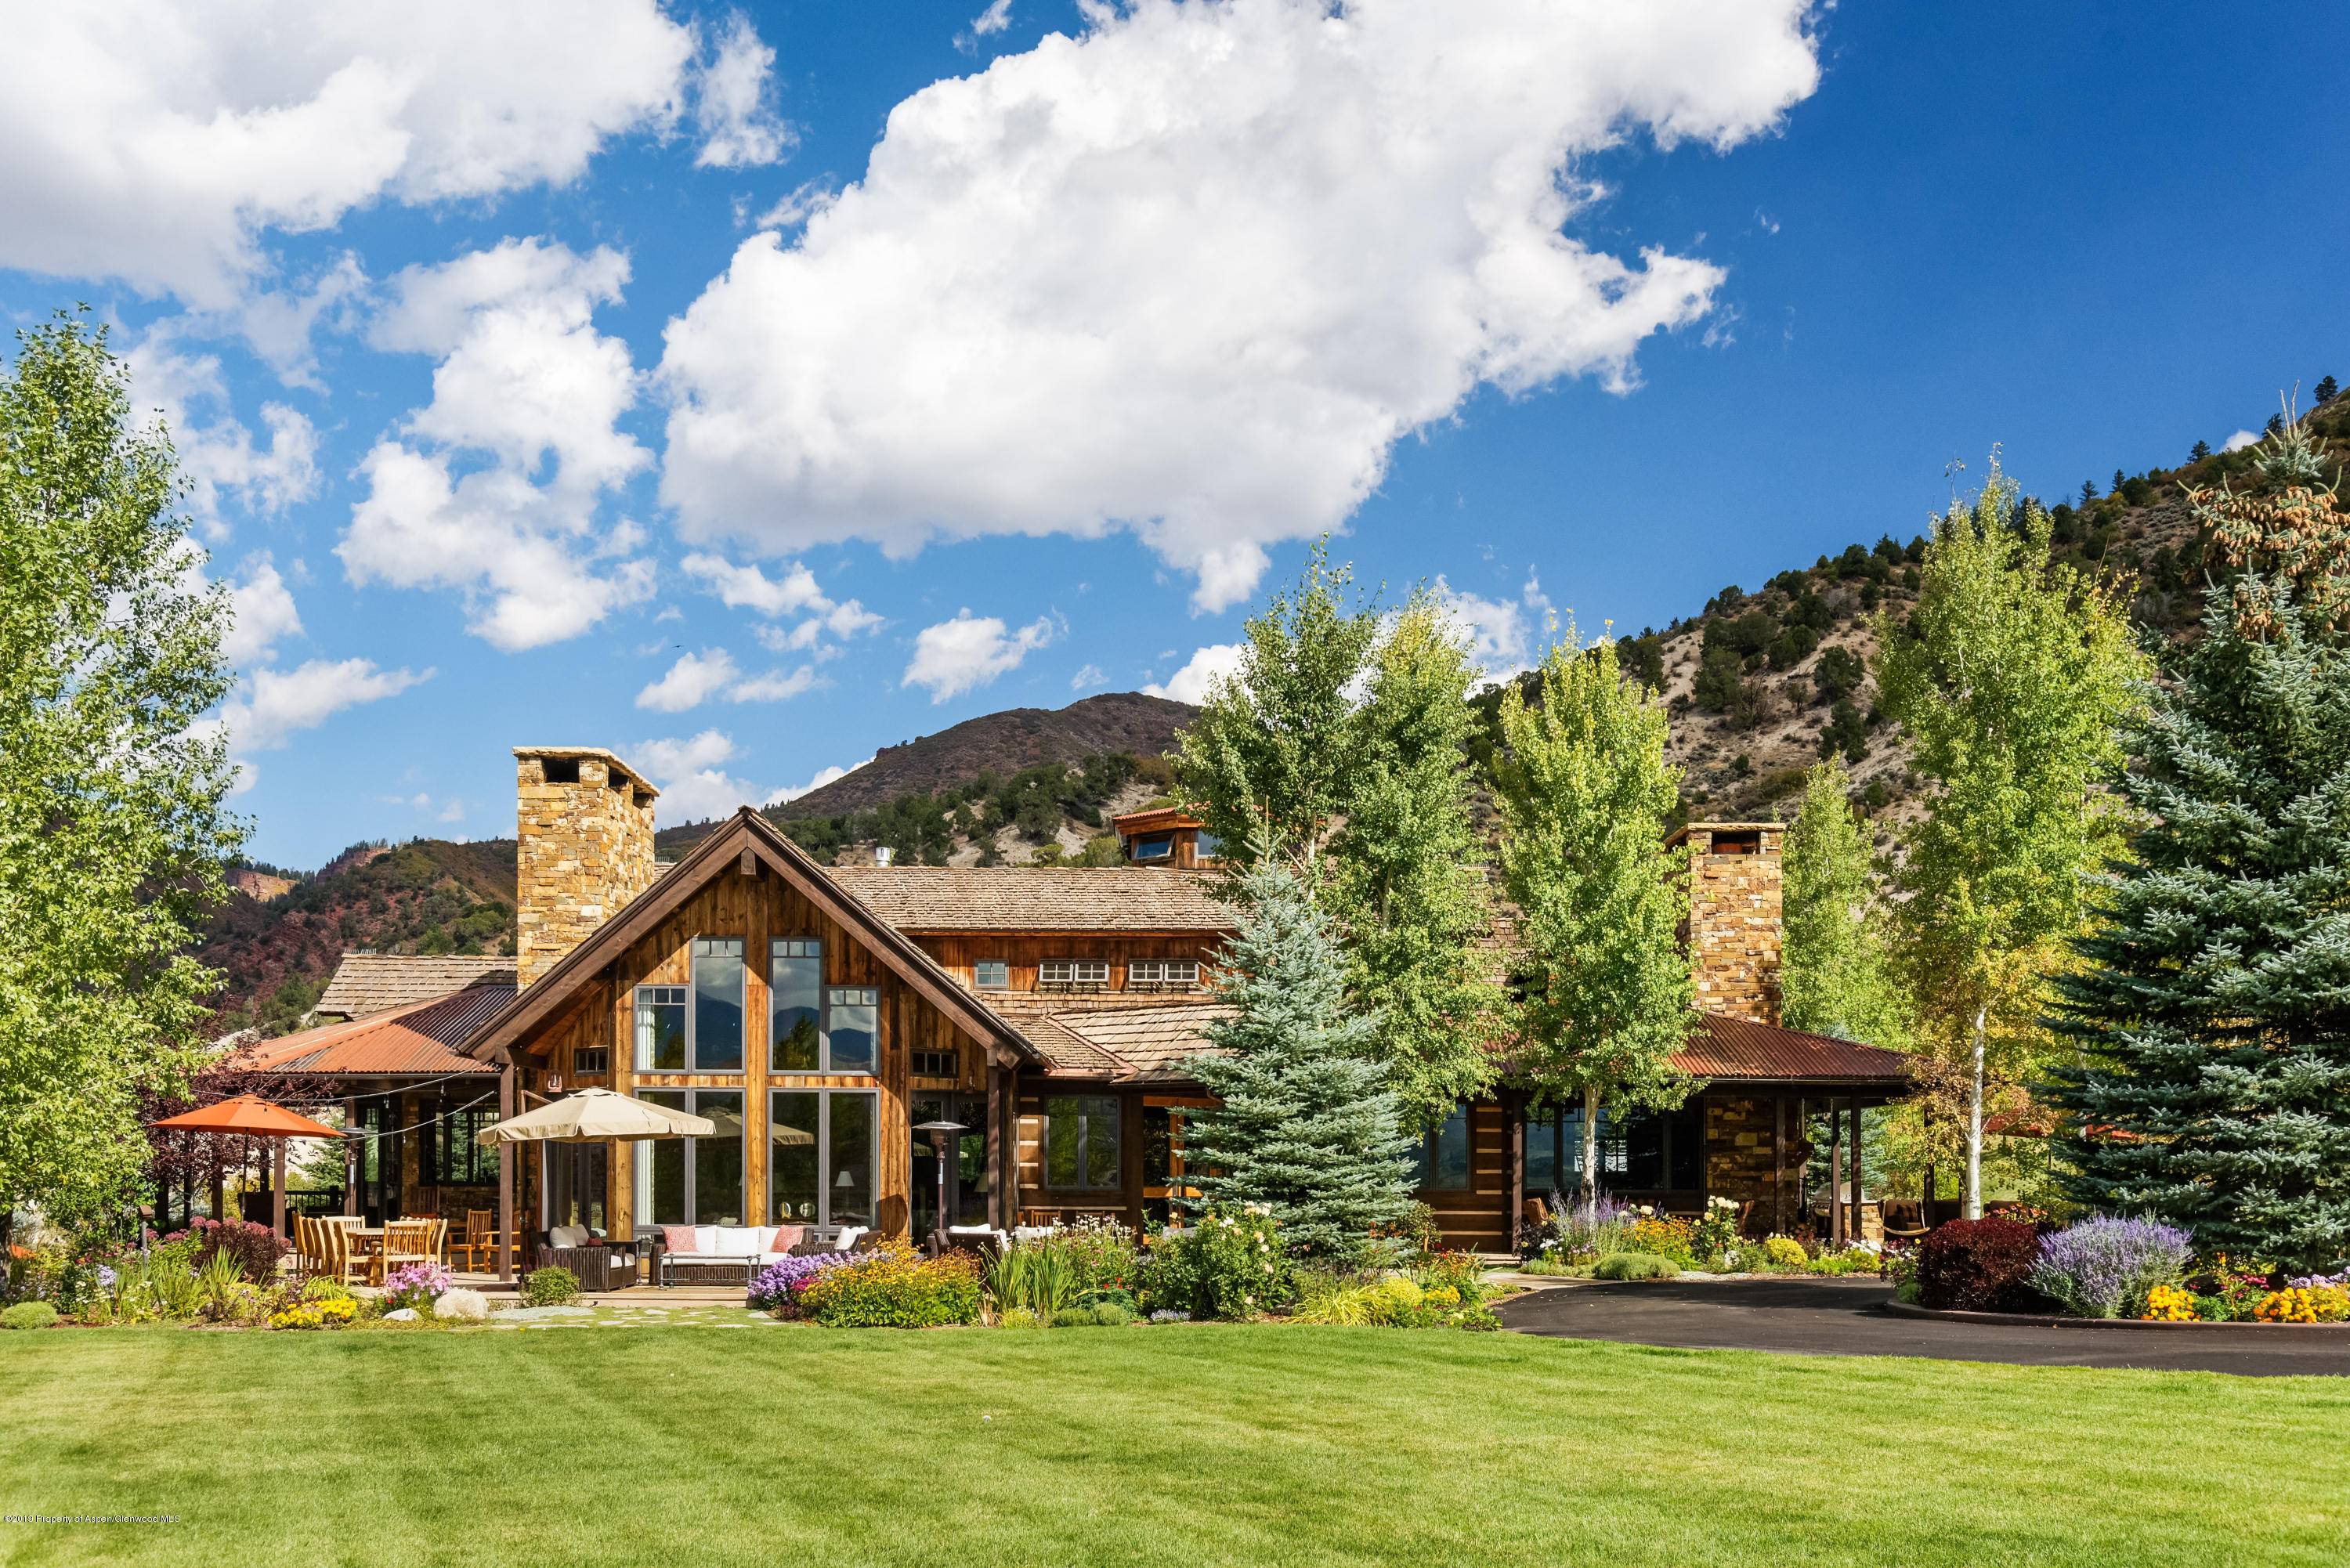 Incredible Aspen Valley Downs estate provides a tranquil and luxurious retreat just outside of Aspen.